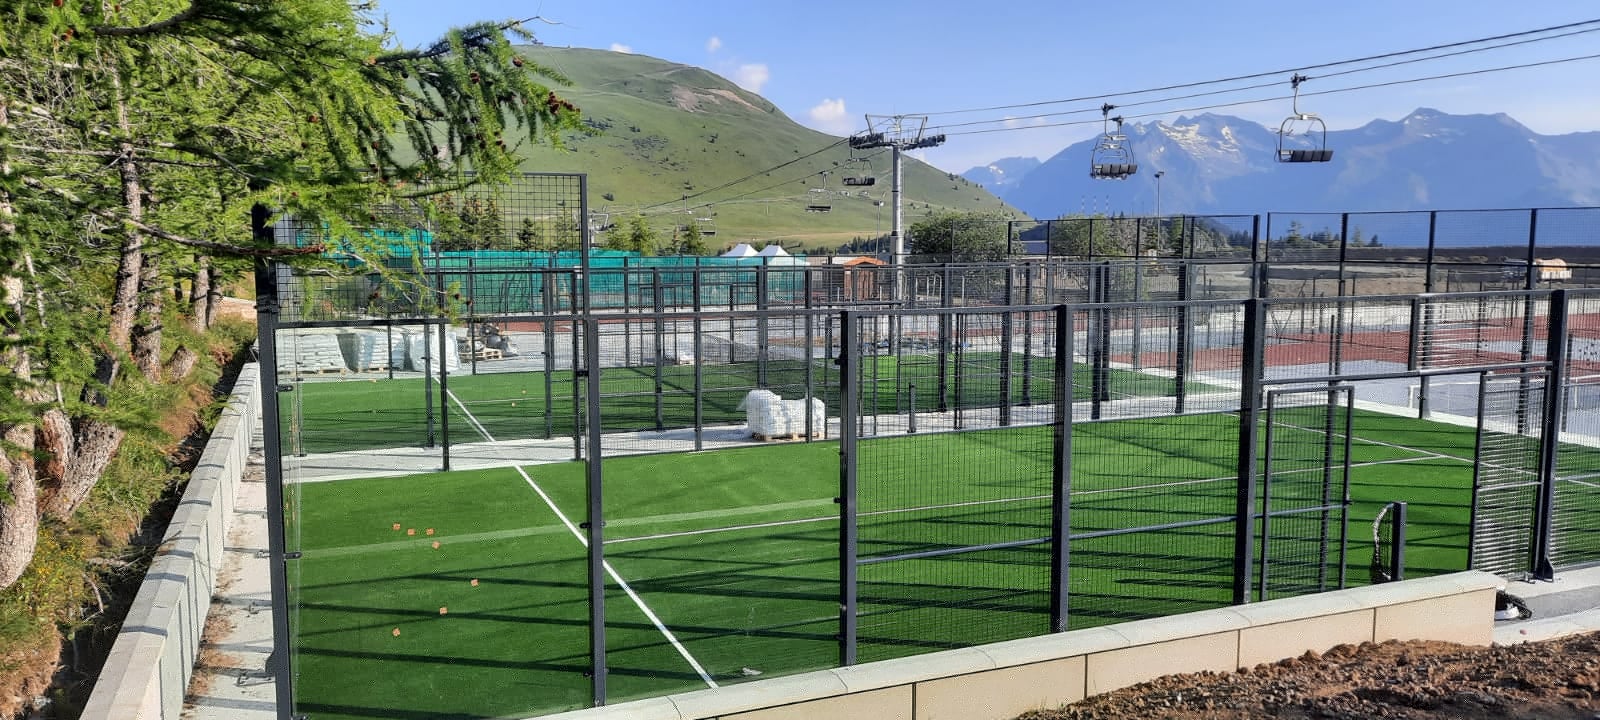 Play at padel in the mountains under the chairlifts